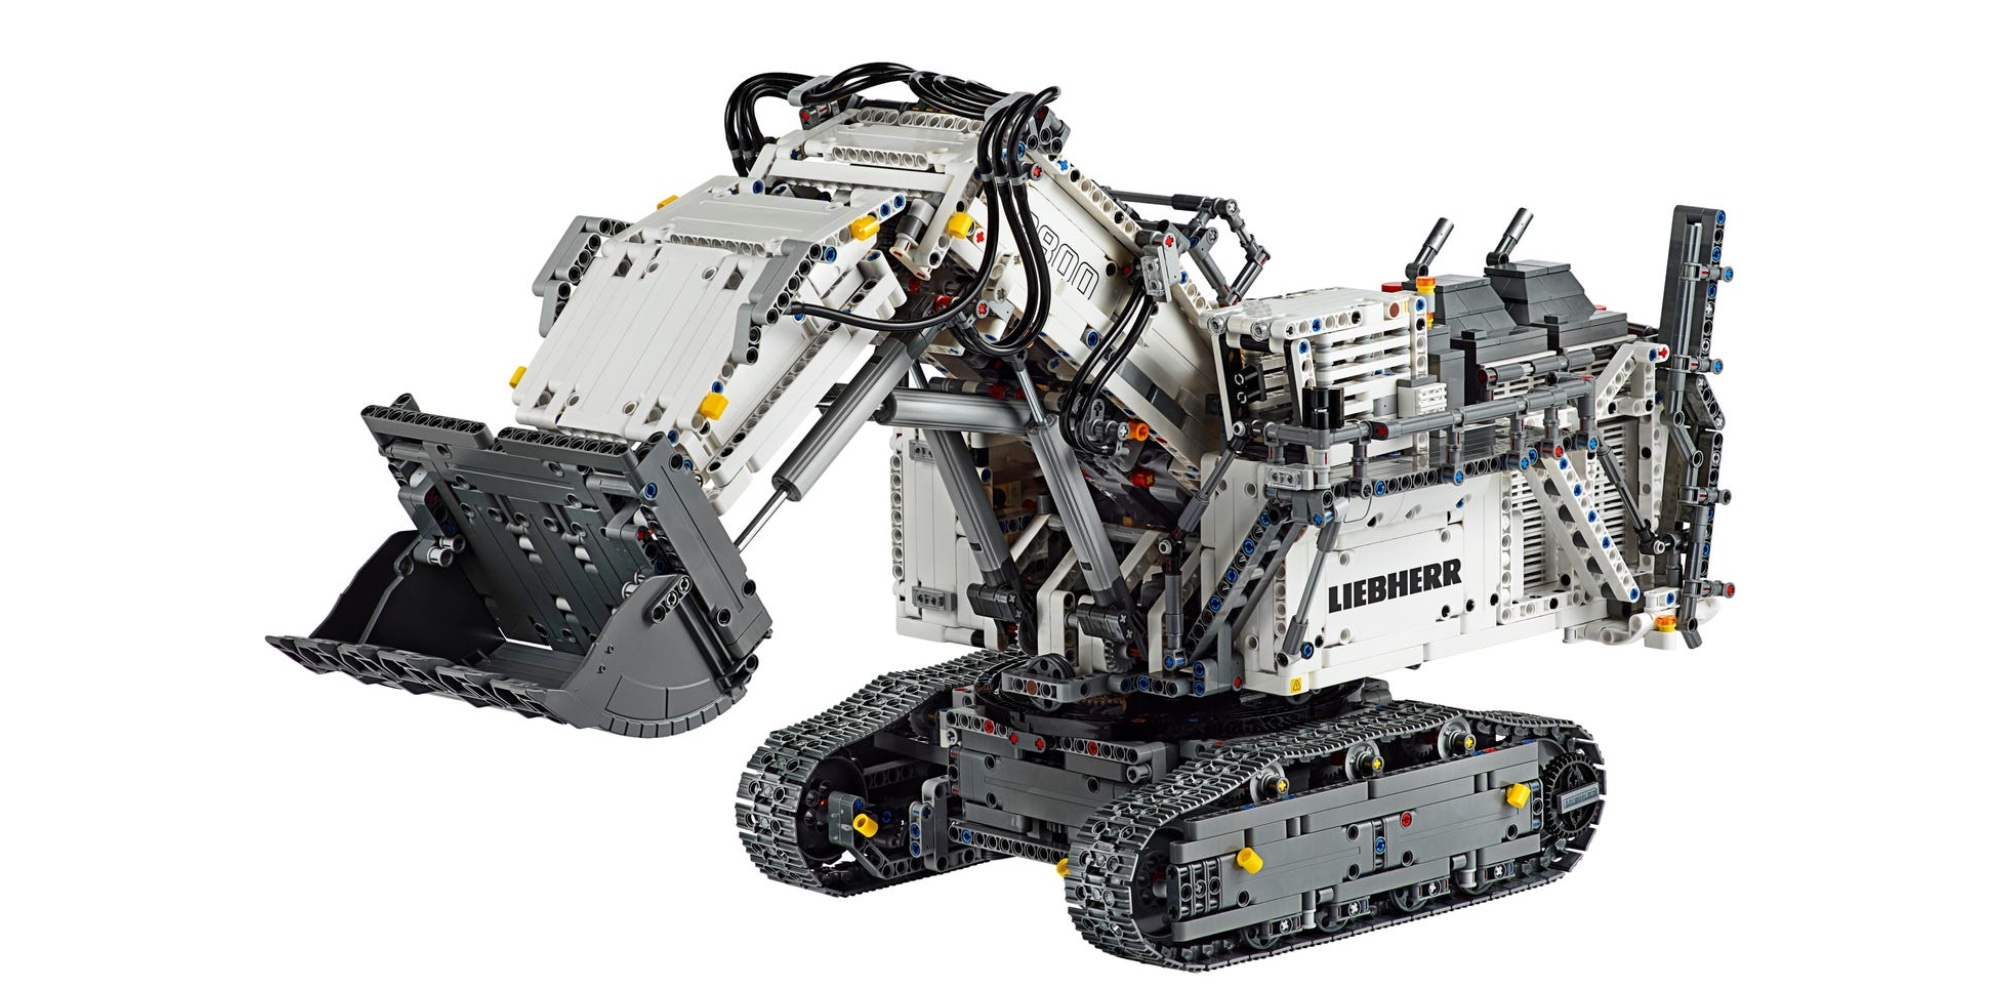 LEGO's Technic Liebherr Excavator sees rare discount, from $12